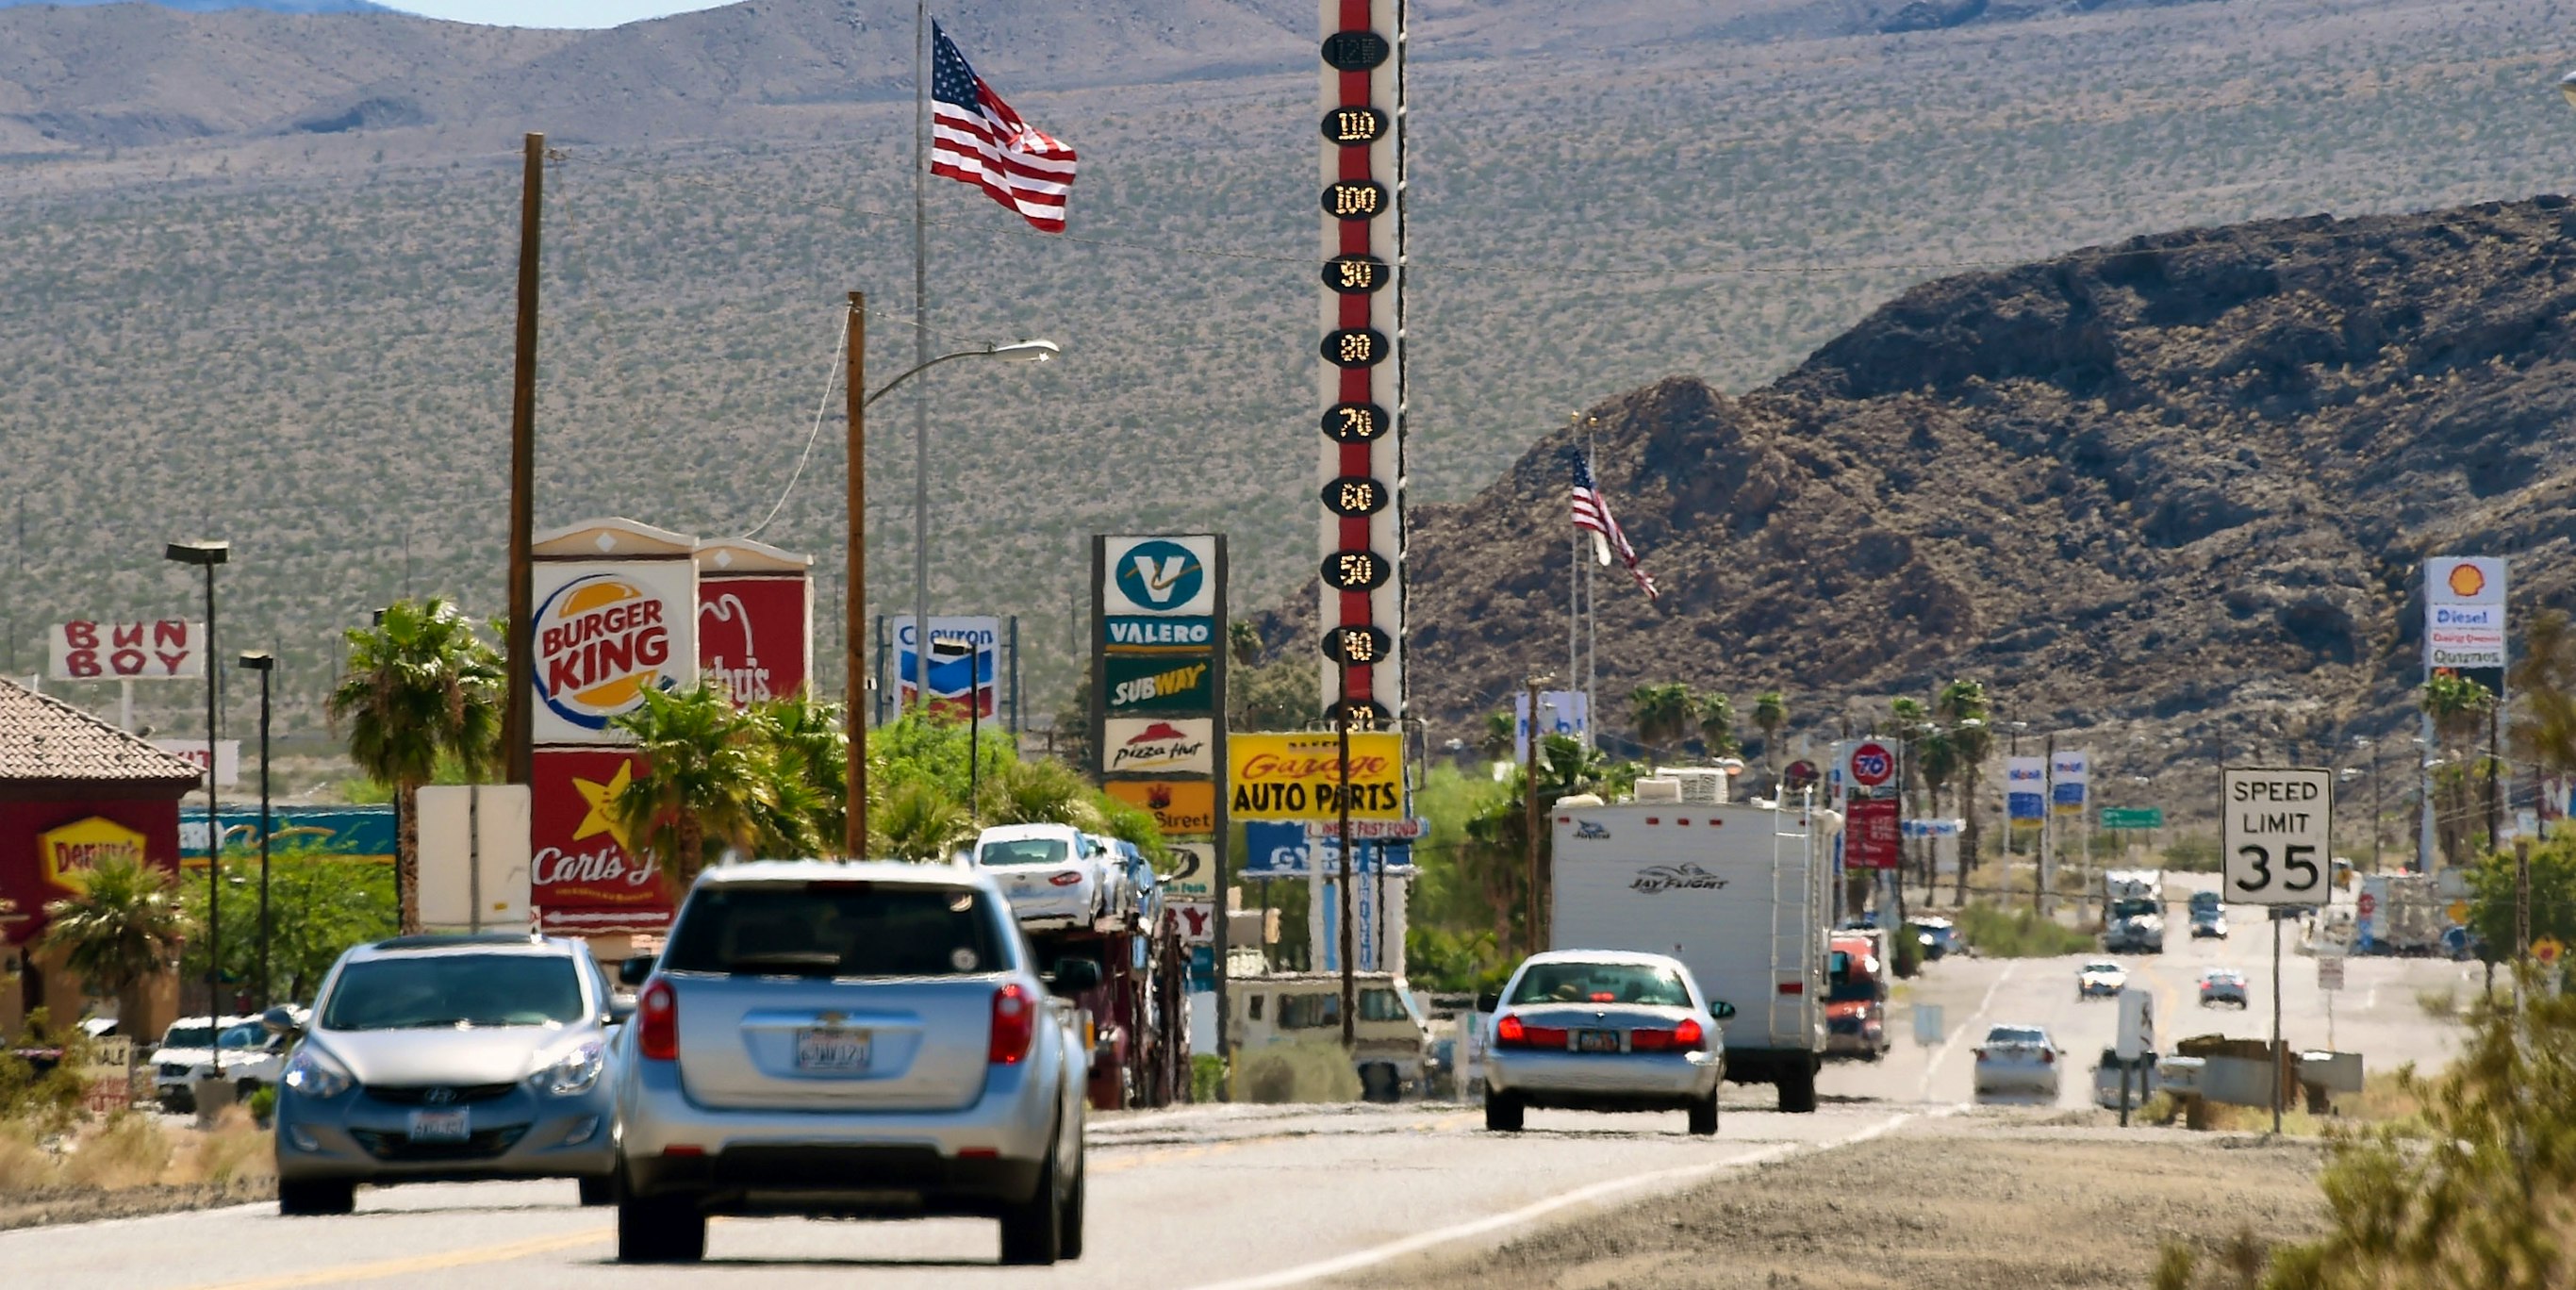 Vehicles drive by a 134-foot-high electronic sign displaying a temperature of 110 degrees Fahrenheit on July 23, 2014 in Baker, California.